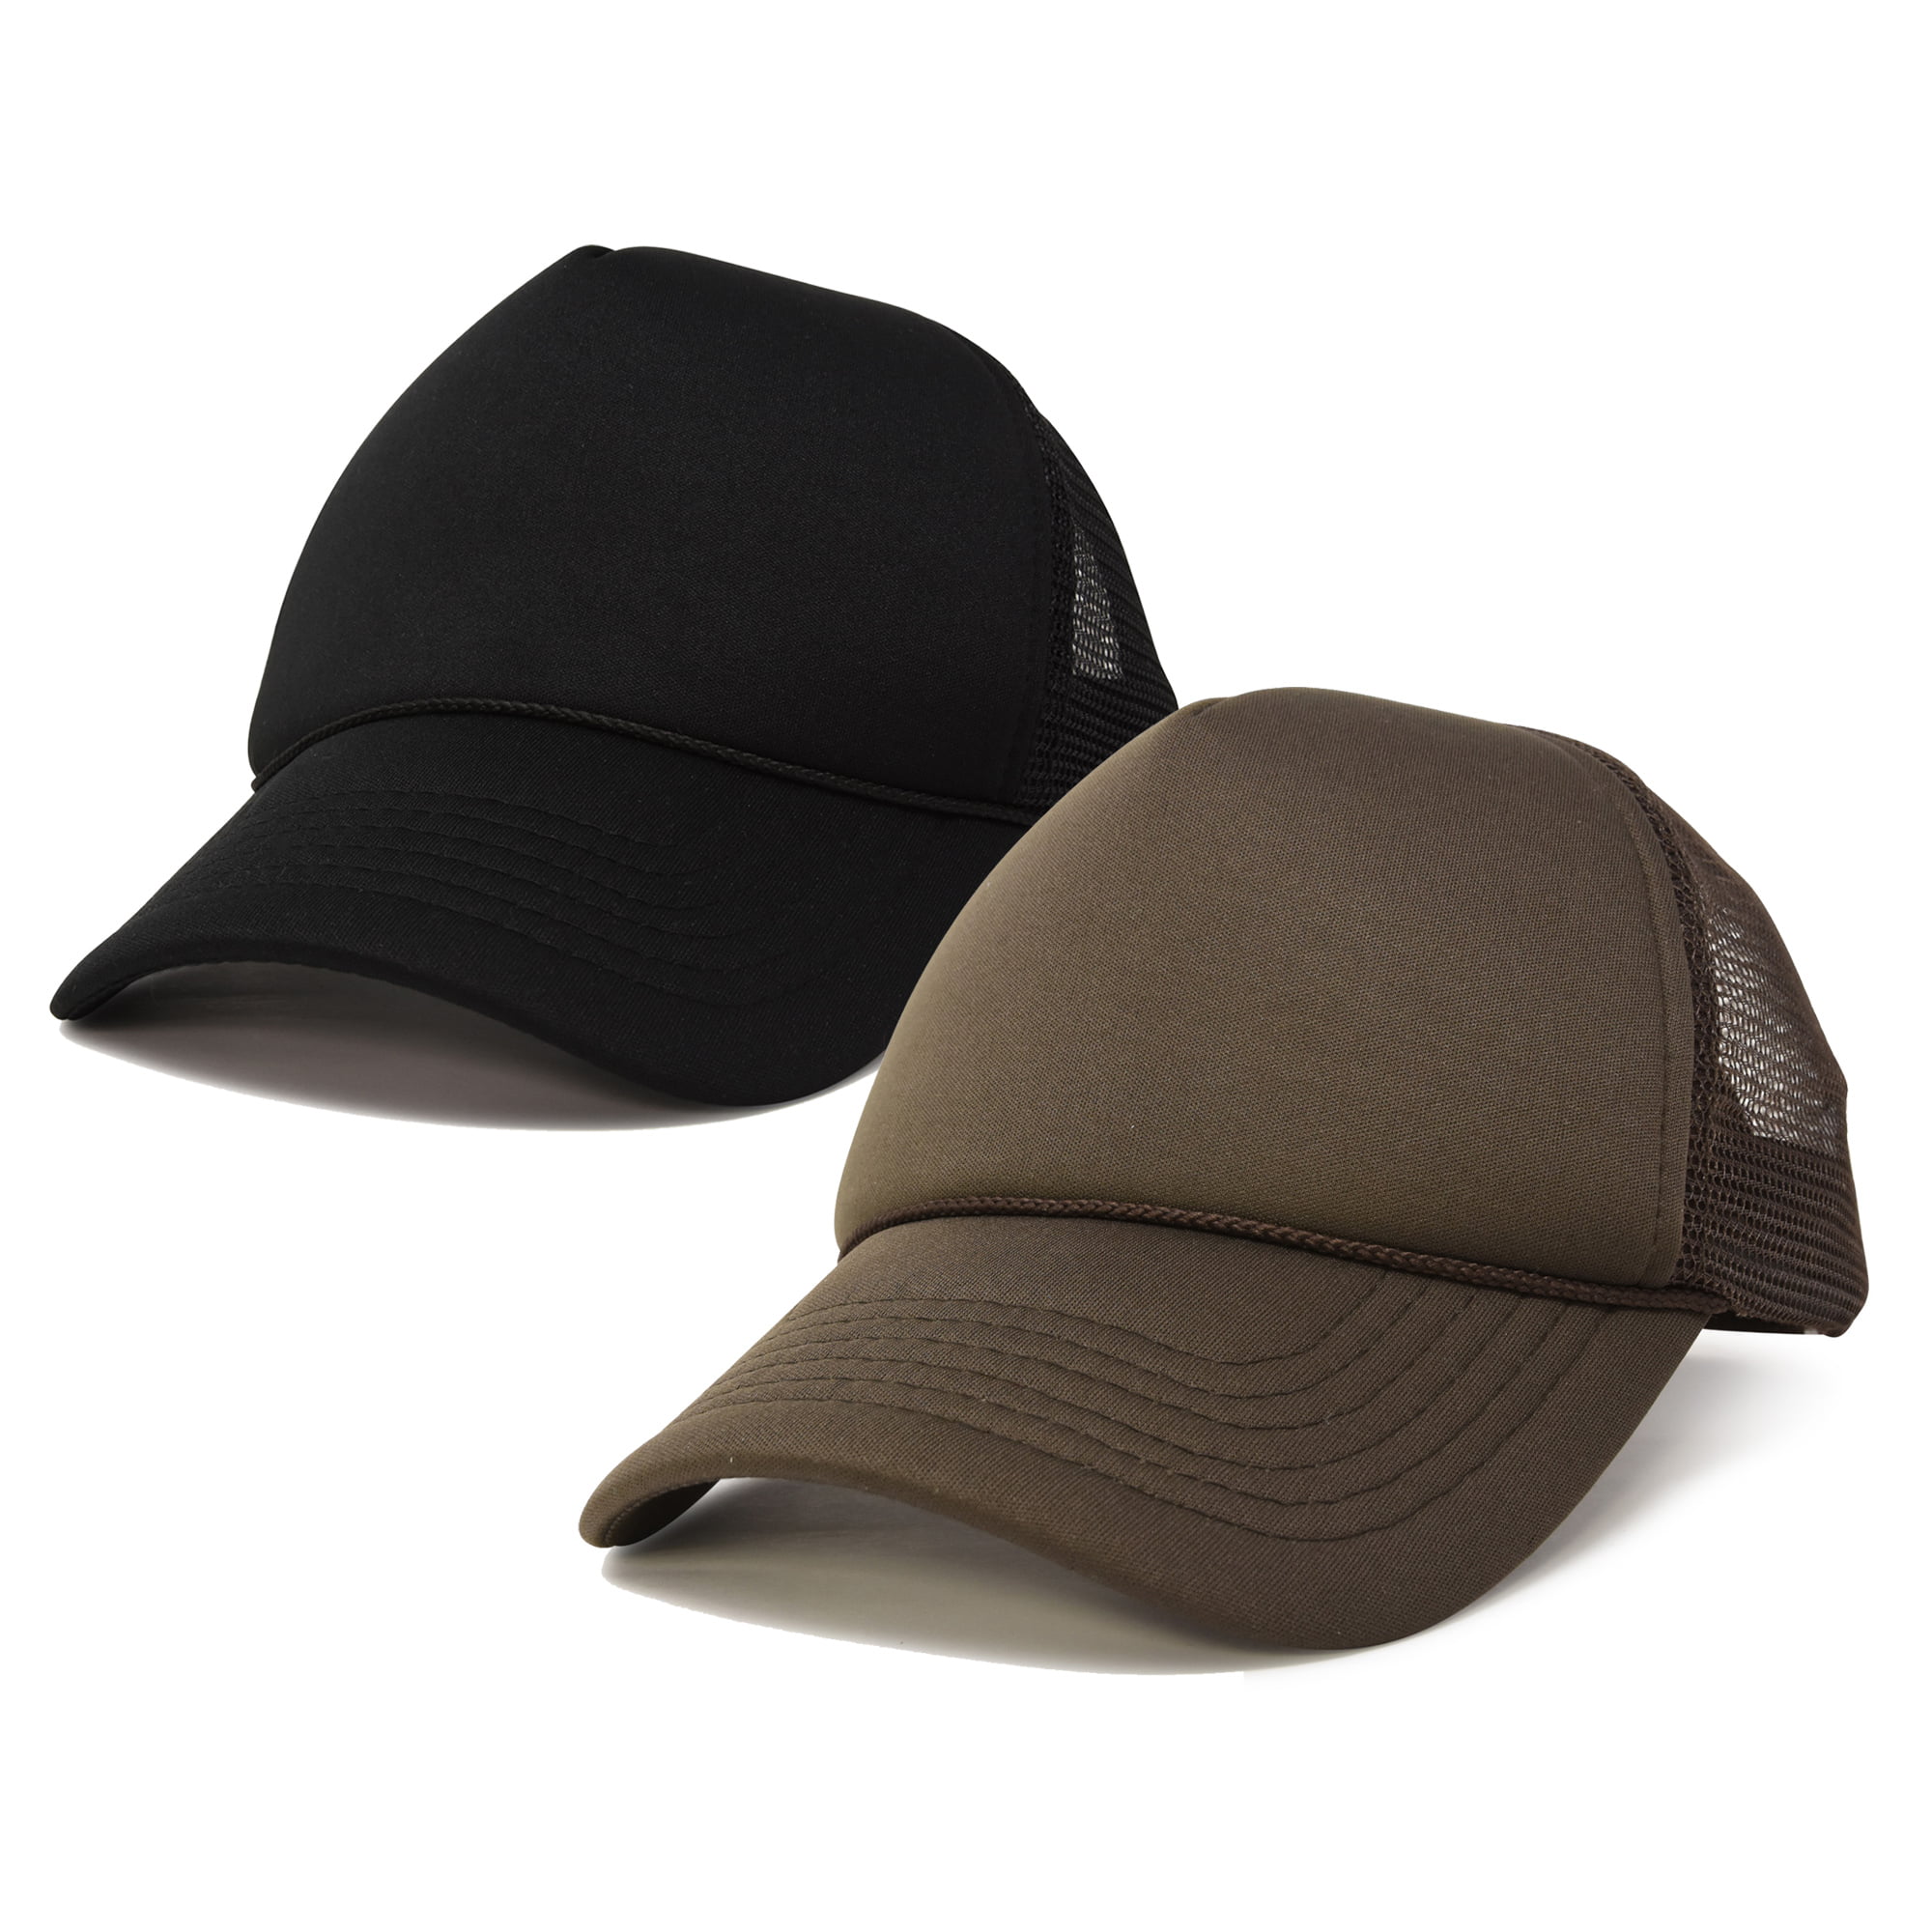 2 for 1 Deal DALIX Solid Blank Trucker Hats Caps 